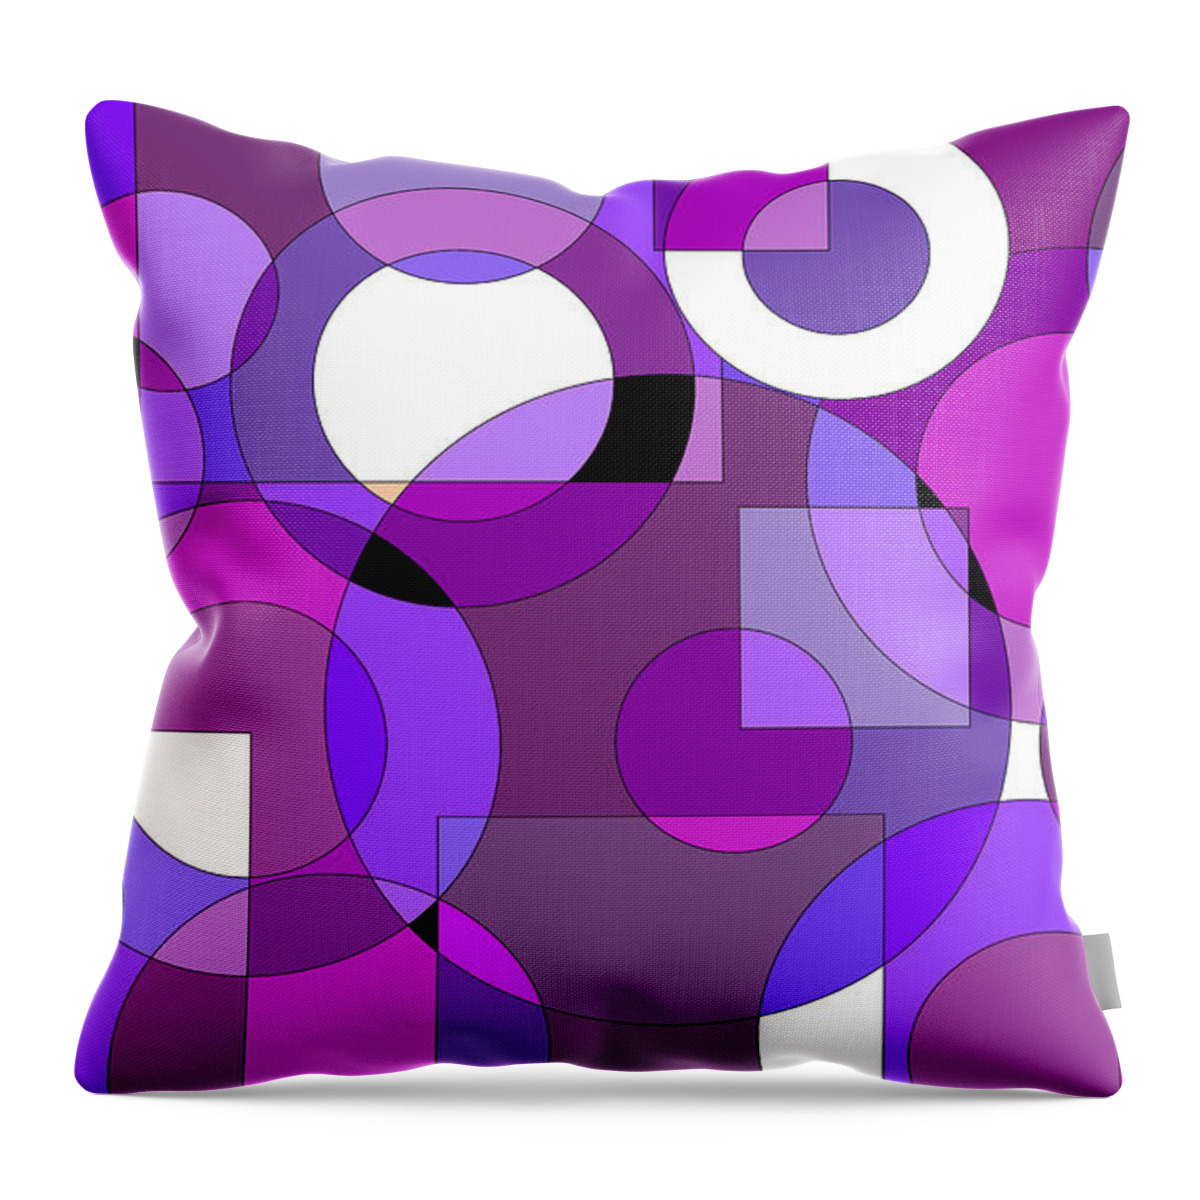 A Purple Passion Throw Pillow featuring the digital art A Purple Passion by Val Arie